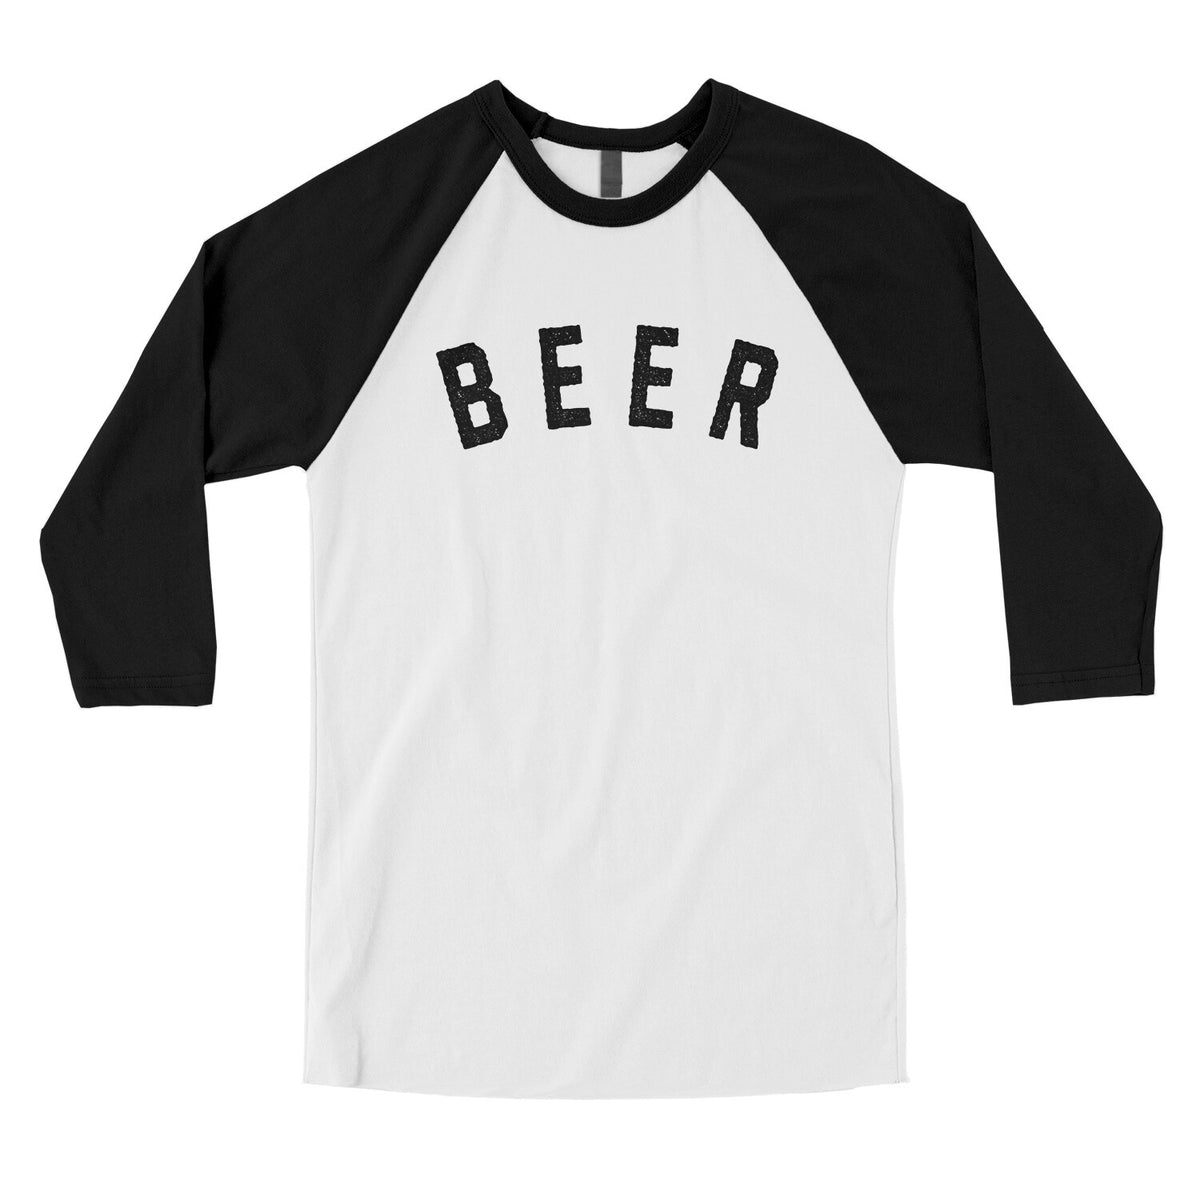 Beer in White with Black Color